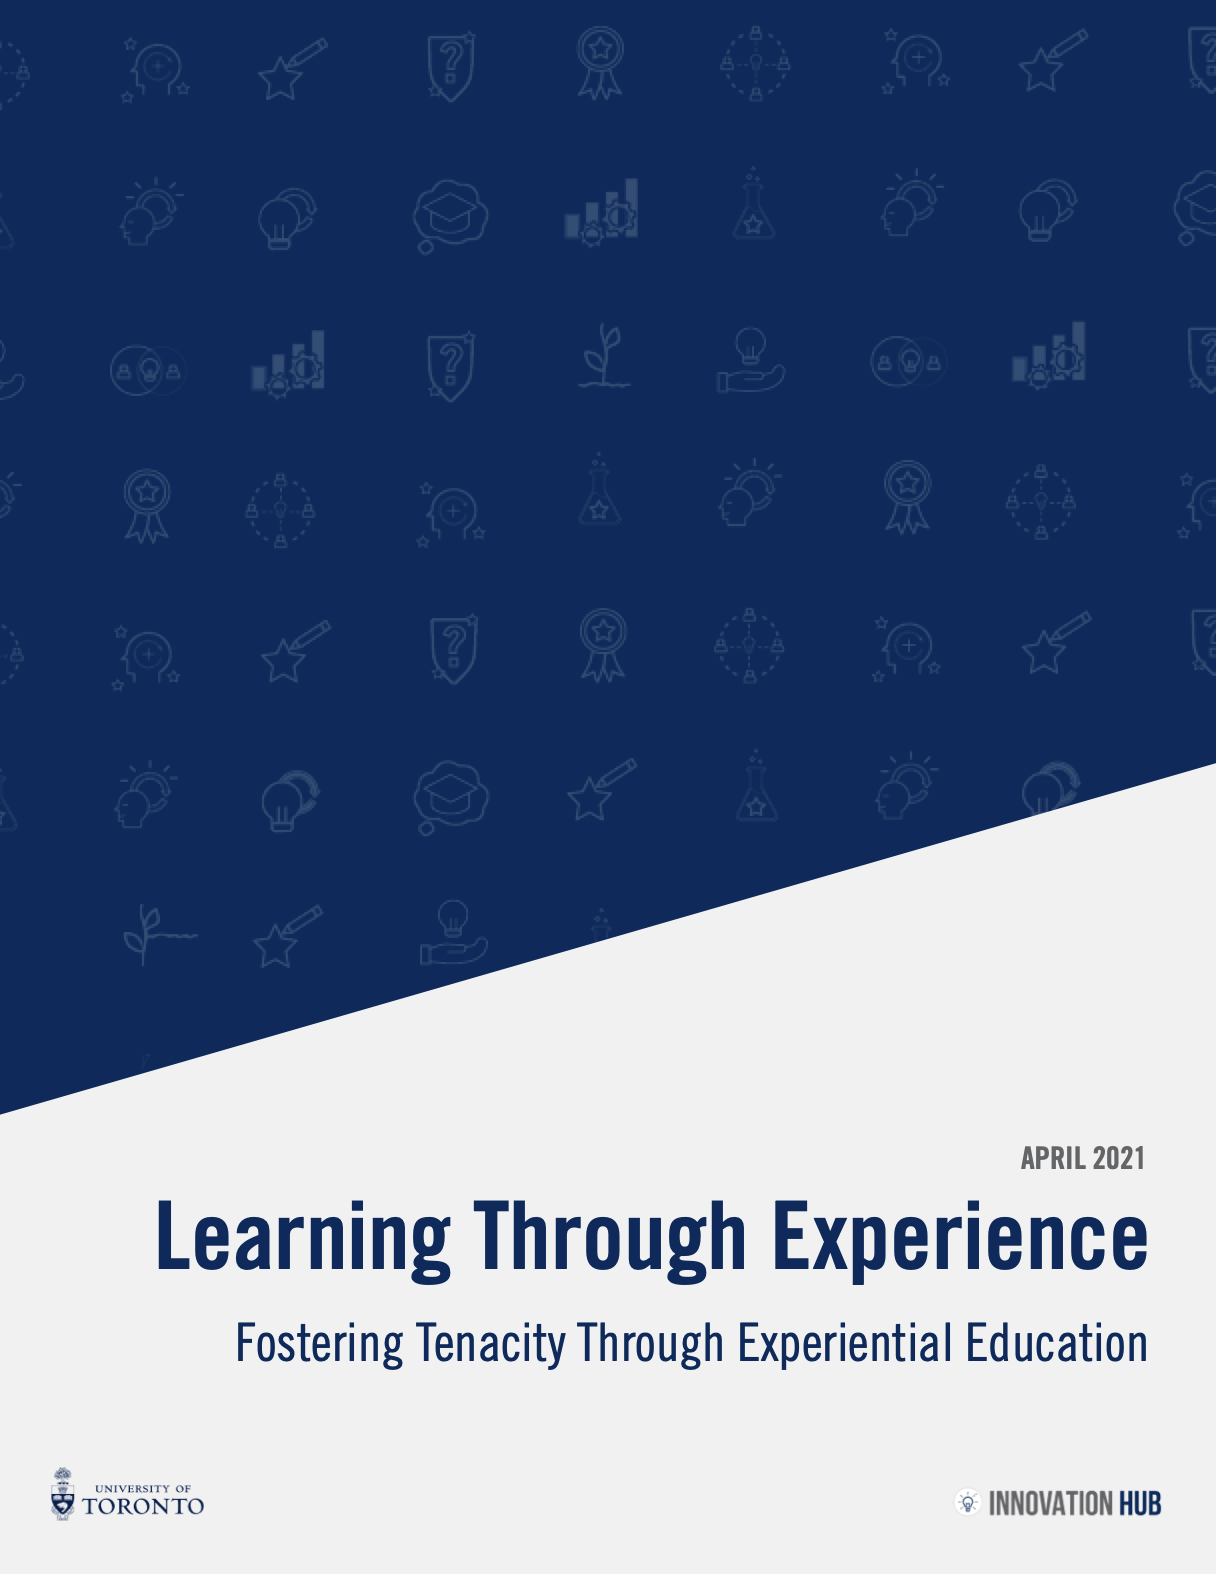 DRR_LearningThroughExperience_TitleSection_Image